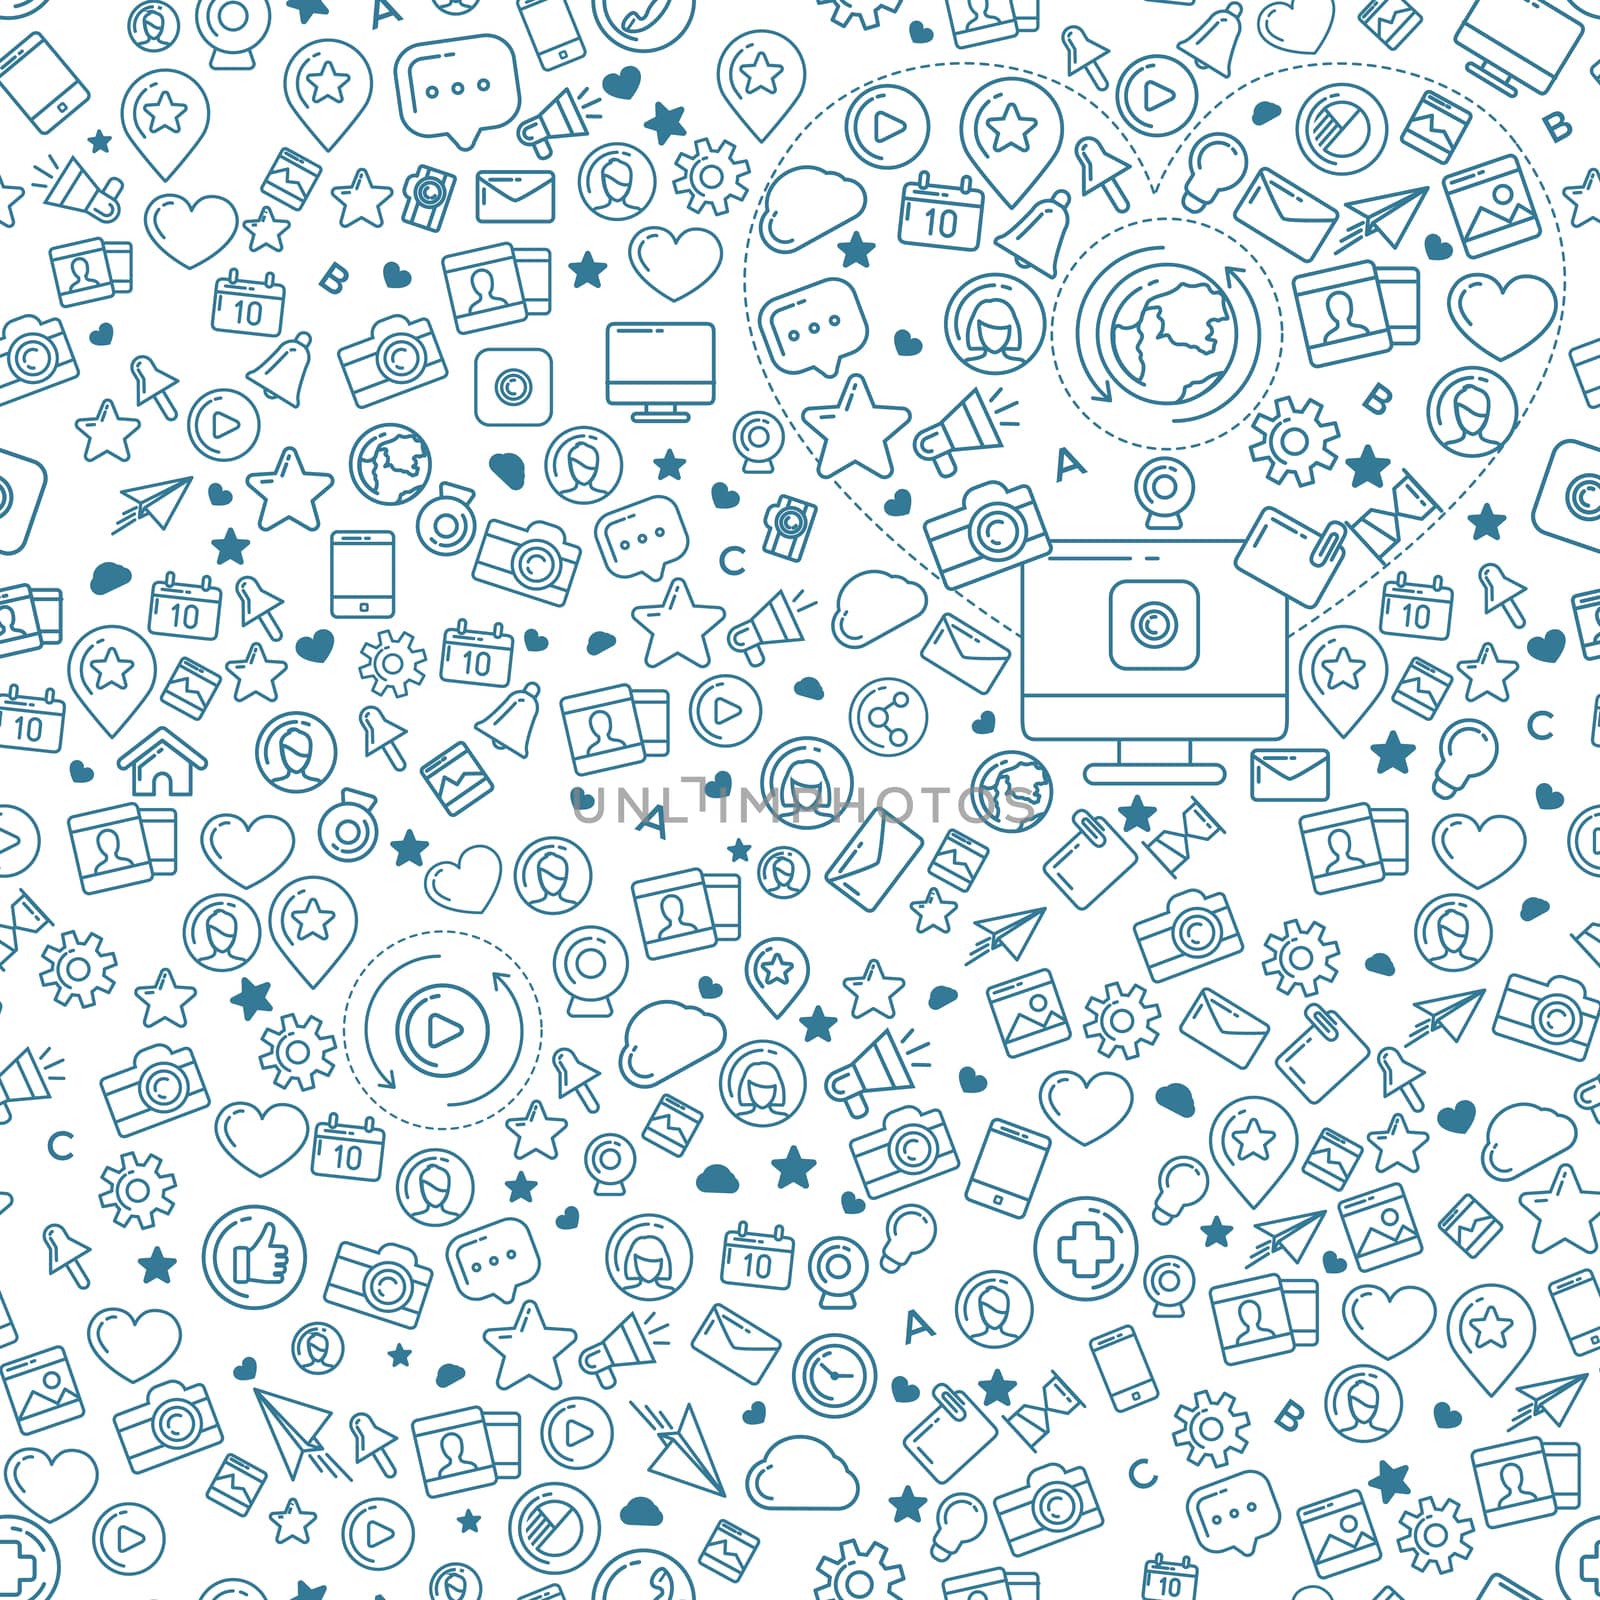 Flat linear seamless pattern of social media, social networking, mobile app, sharing, communication, and social commerce.